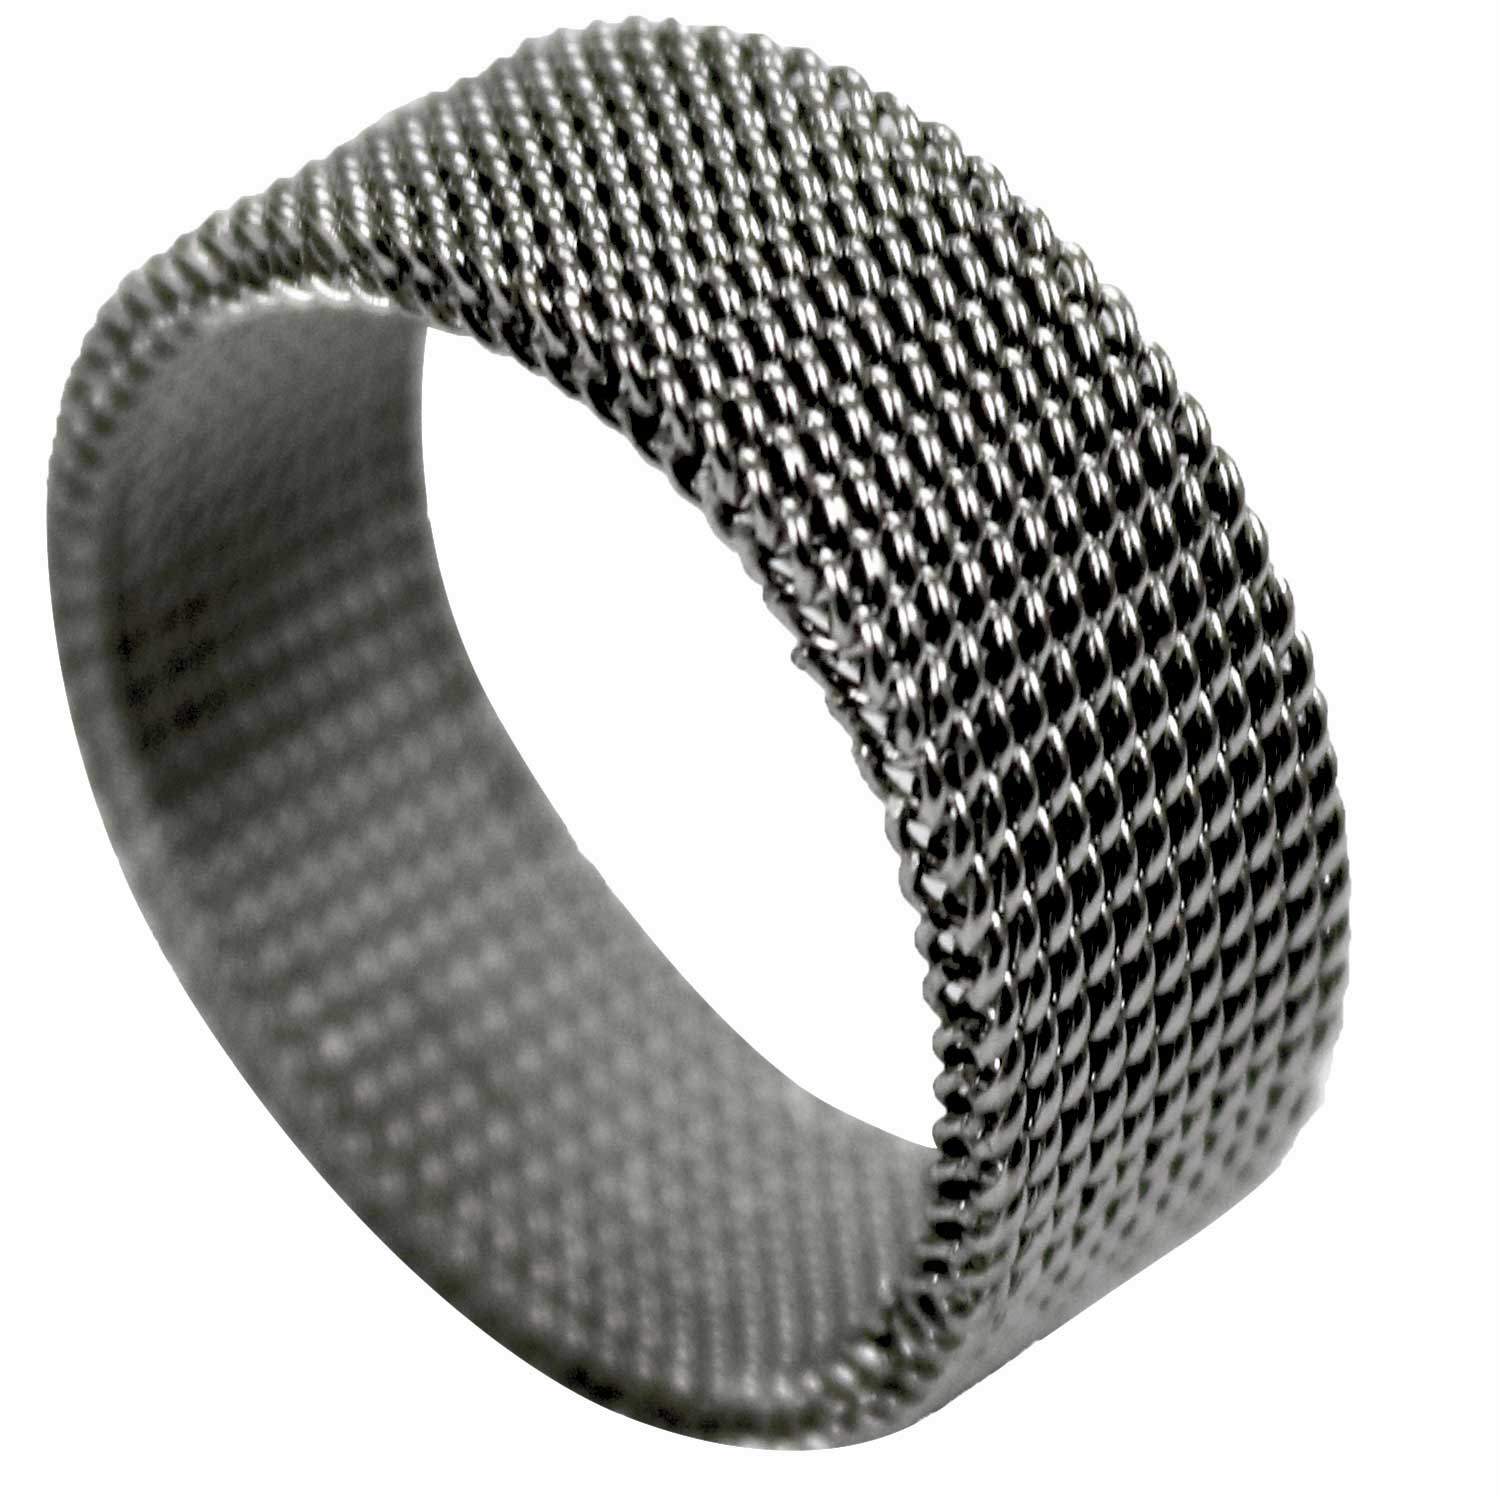 https://www.darksword-armory.com/wp-content/uploads/2018/04/chain-mail-ring-4.jpg